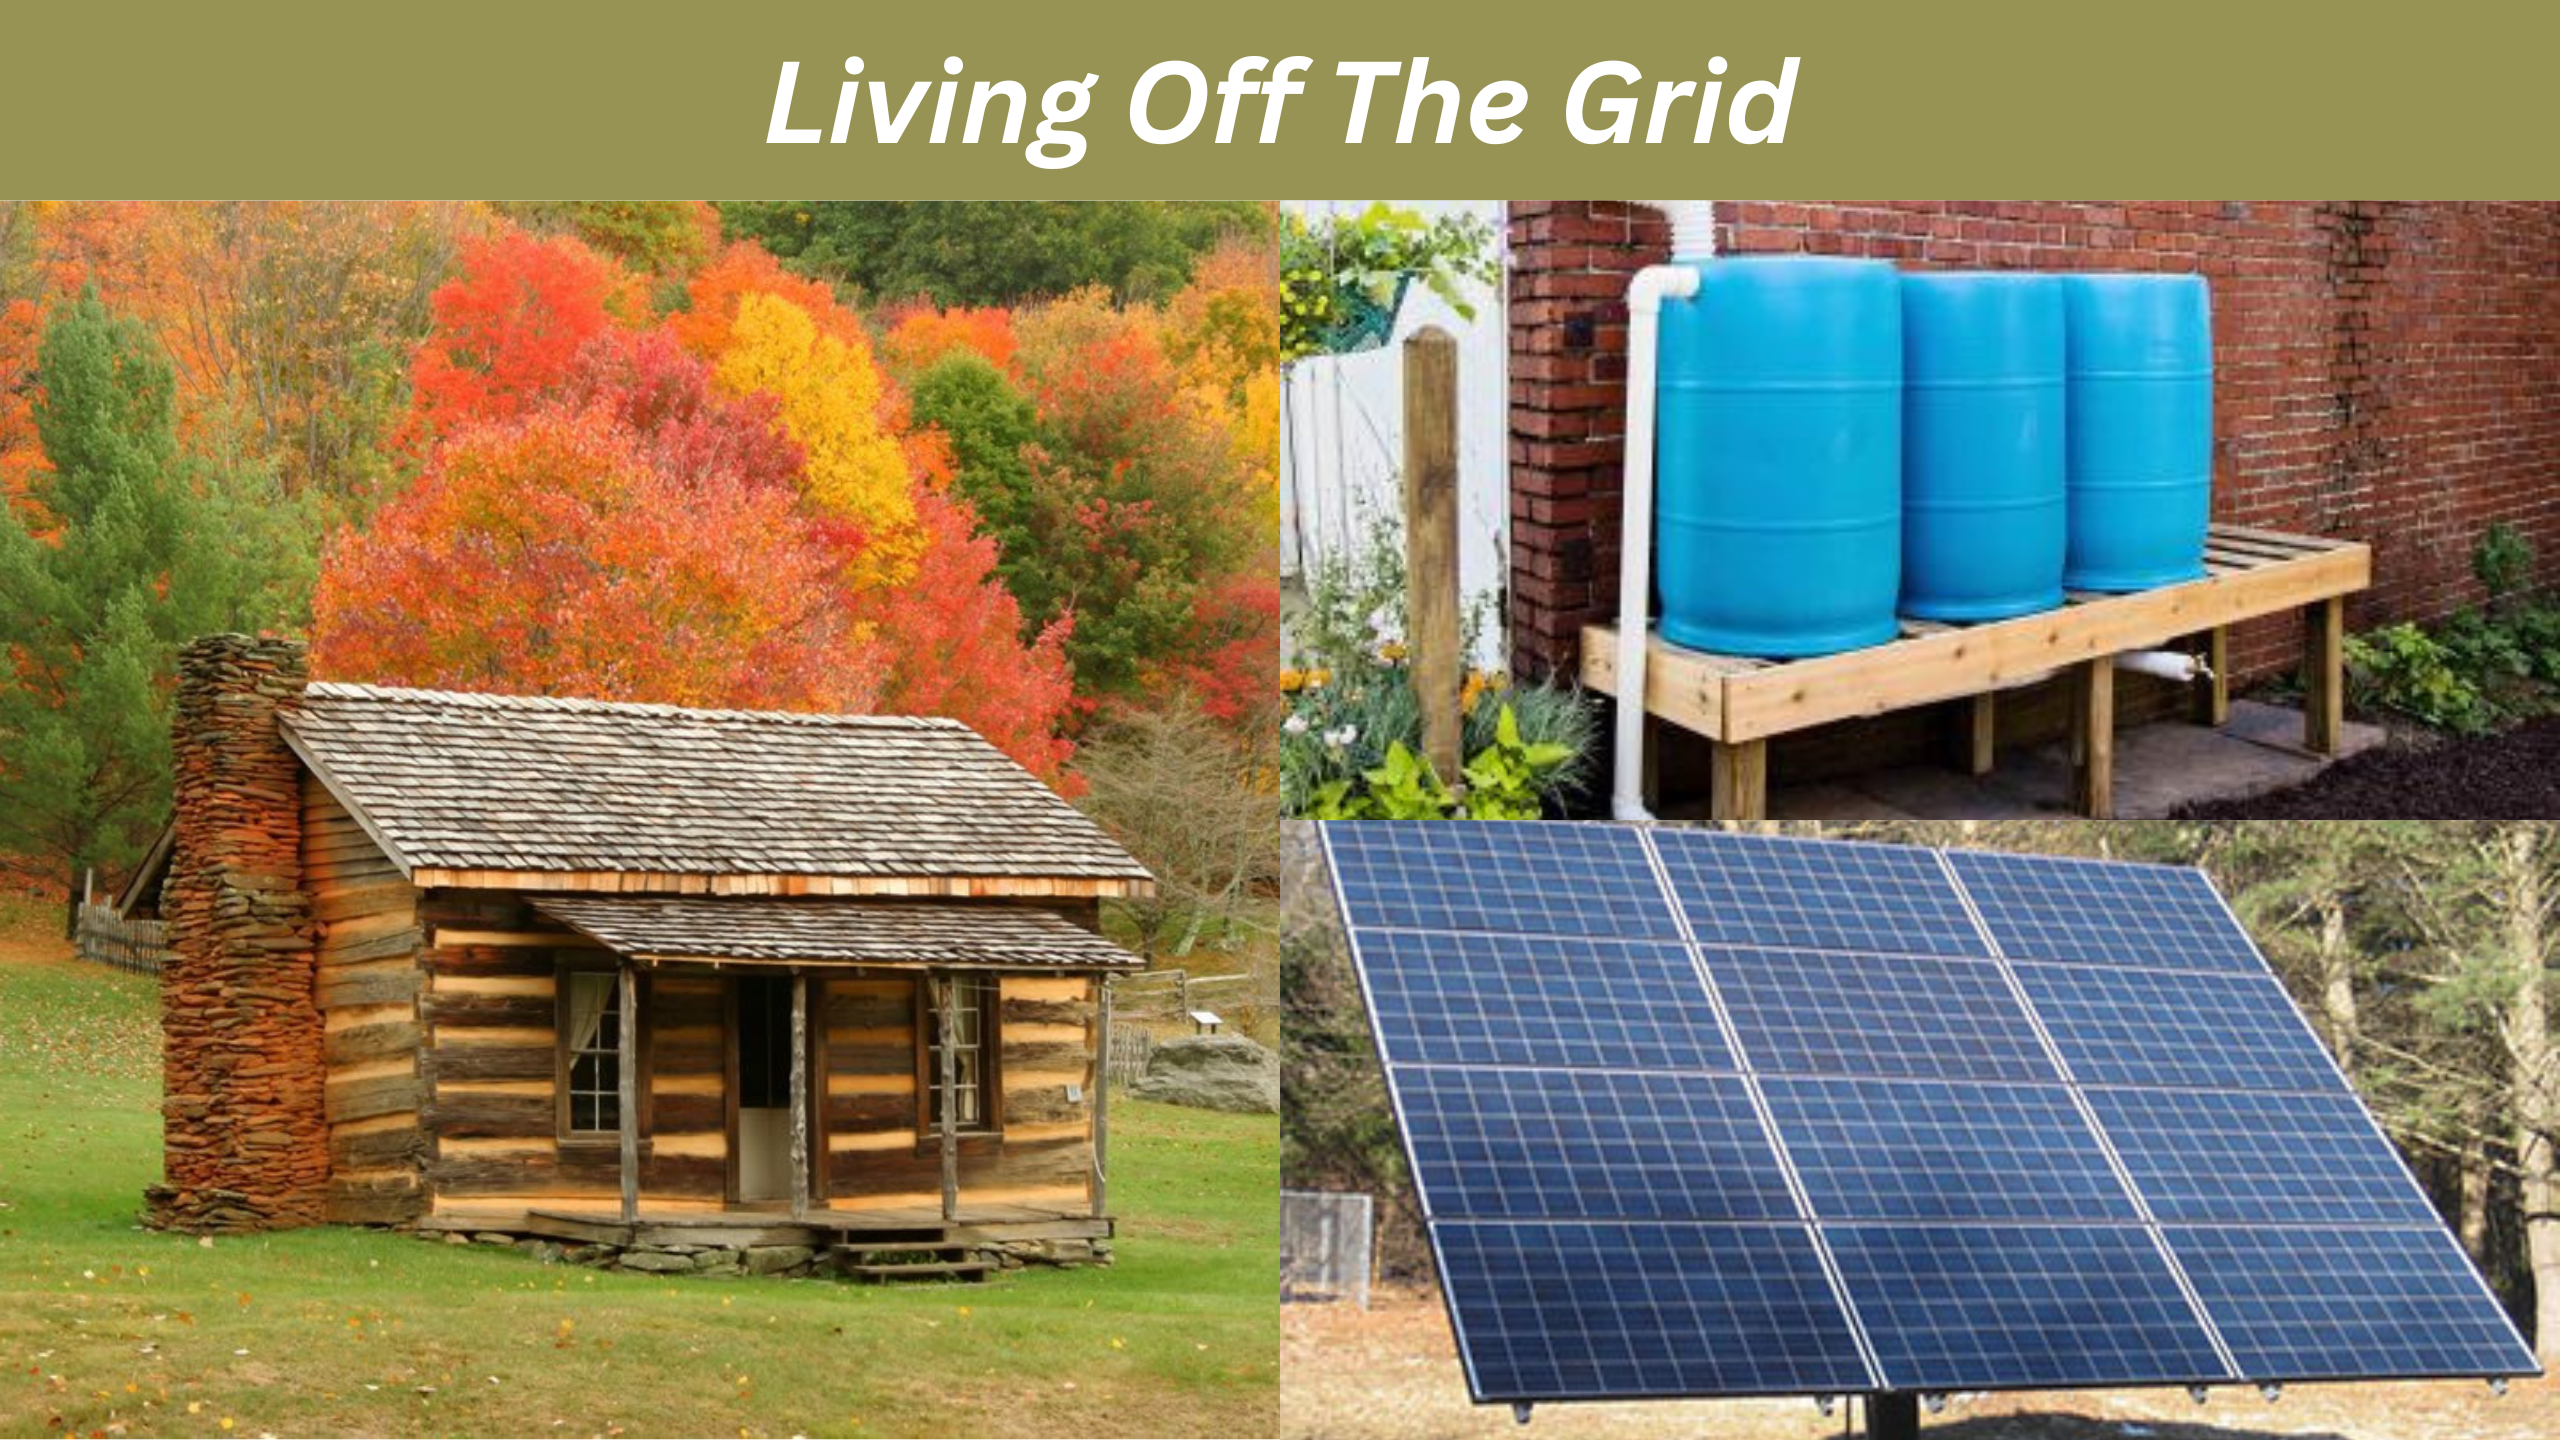 Tips for living off the grid: Introduction